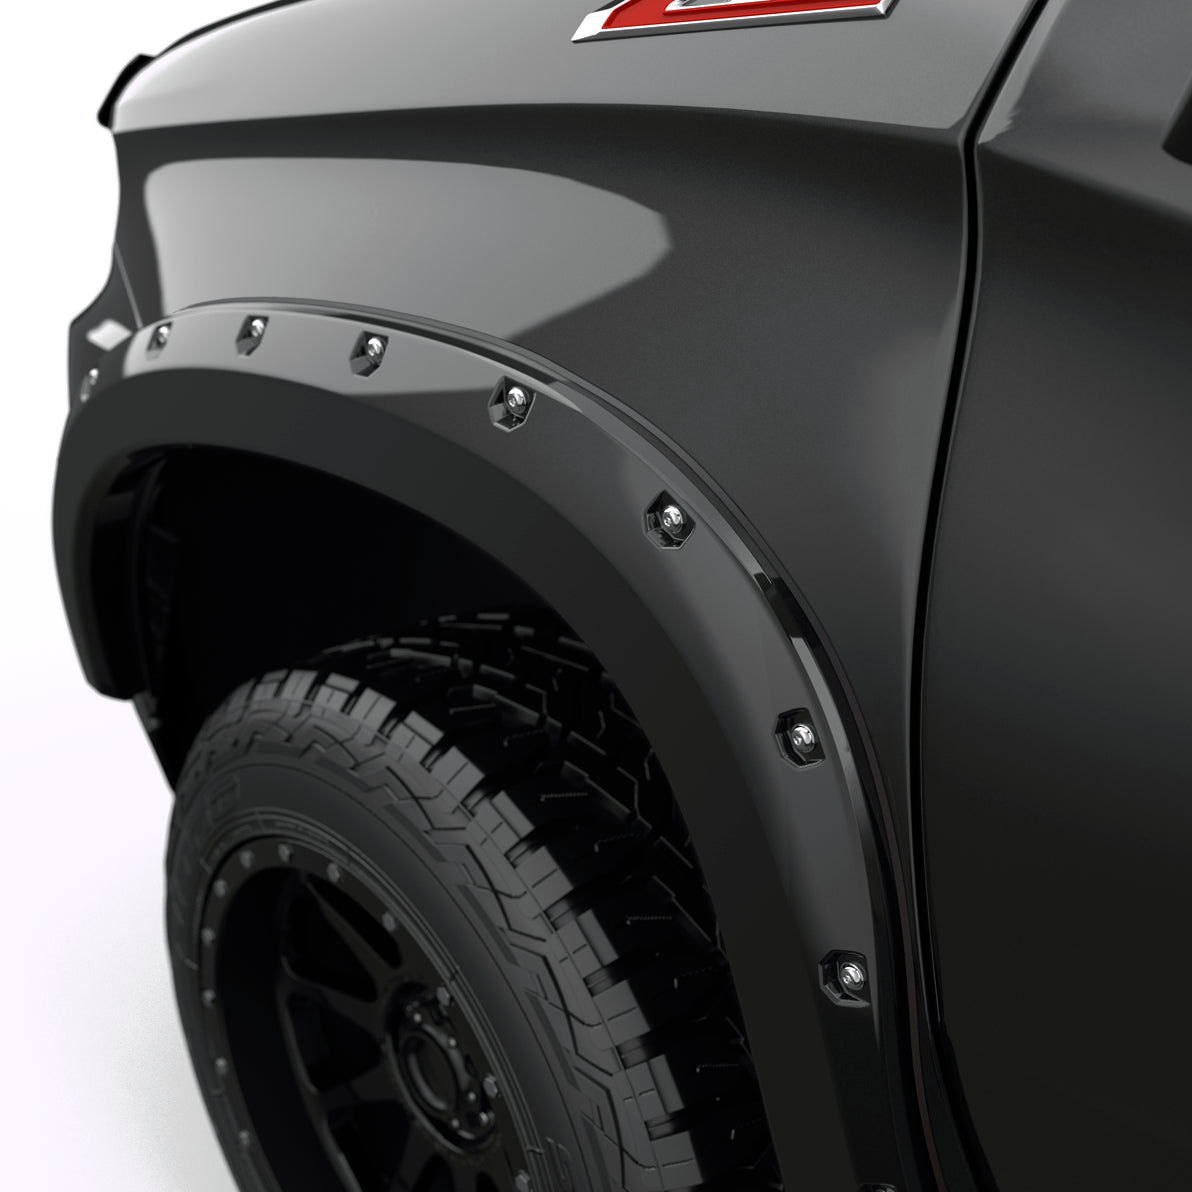 EGR 2023-2024 Chevrolet Silverado 1500 2 & 4 Door Crew Cab Standard Cab Extended Cab Pickup Traditional Bolt-on look Fender Flares set of 4 Painted to Code Black 791654-GBA